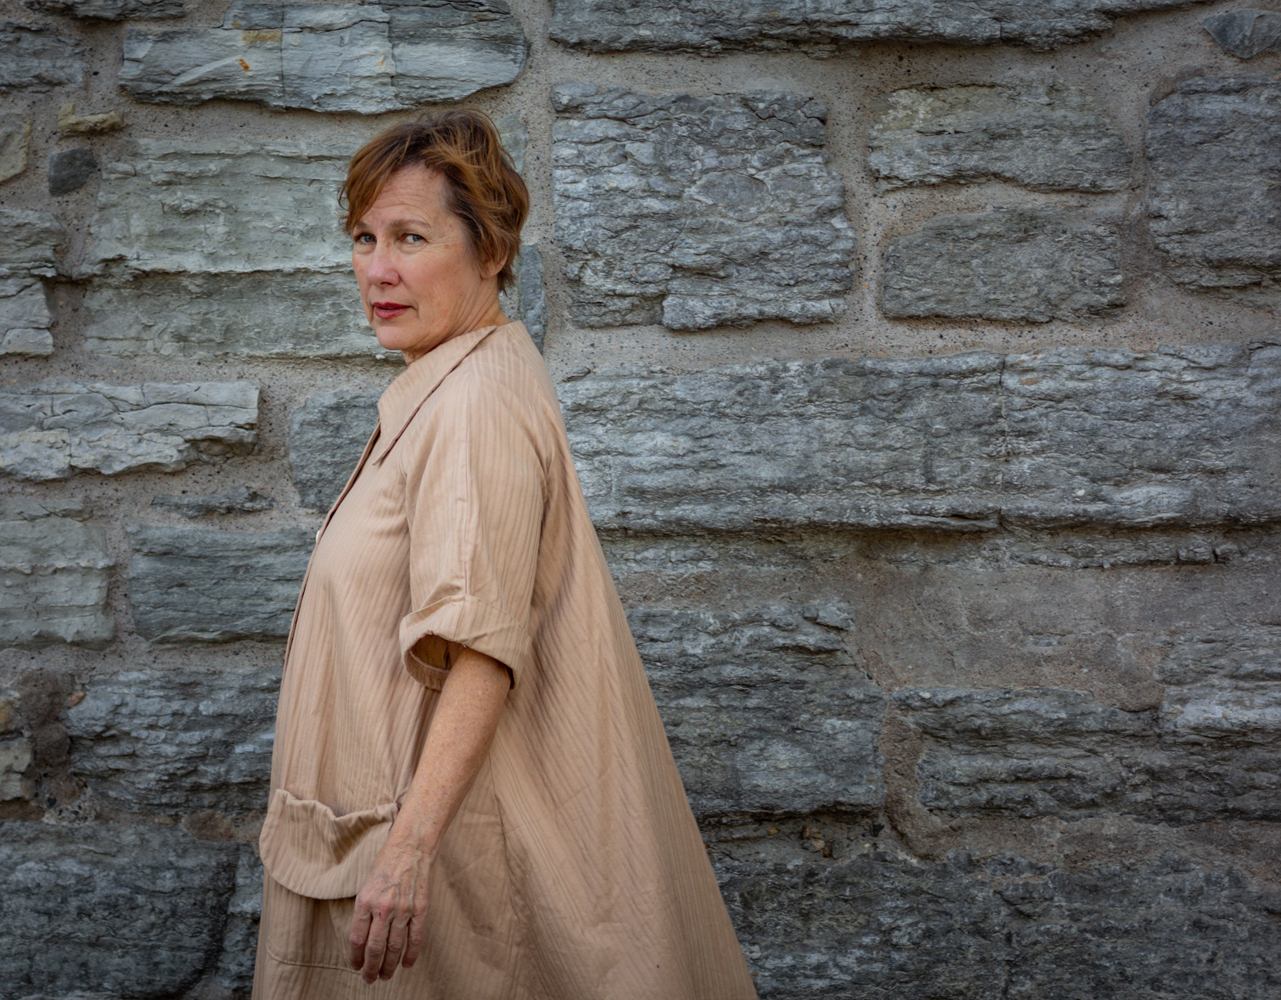 Photo of Iris Dement wearing a camel shirt dress walking to the left of the frame and looking at the camera sideways in front of a stone wall.